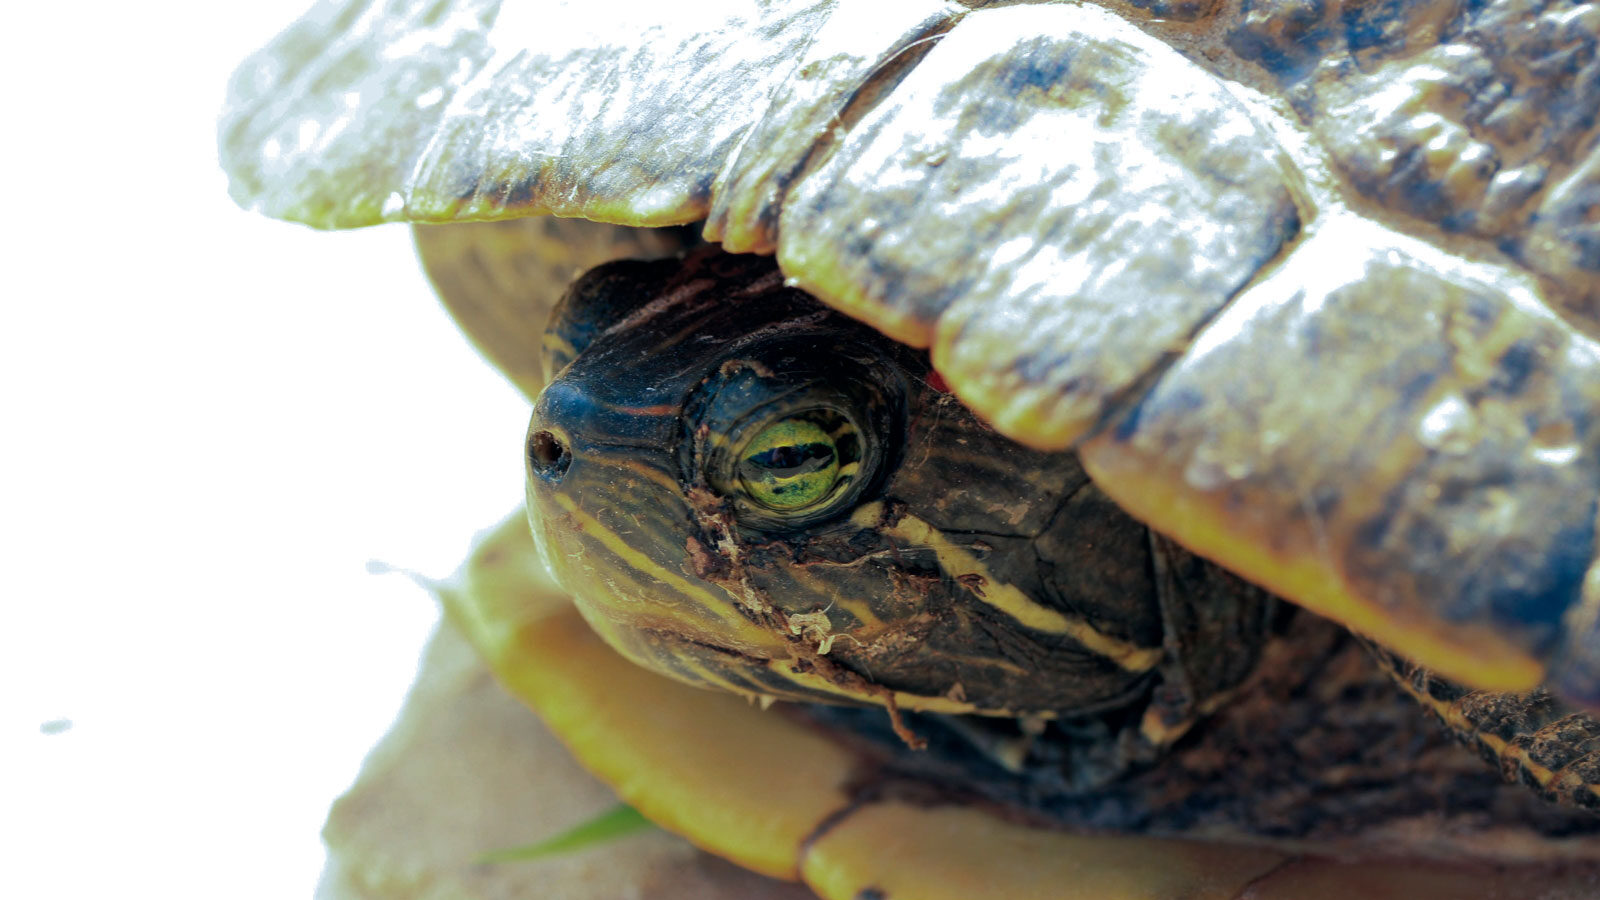 Red-eared slider in its shell